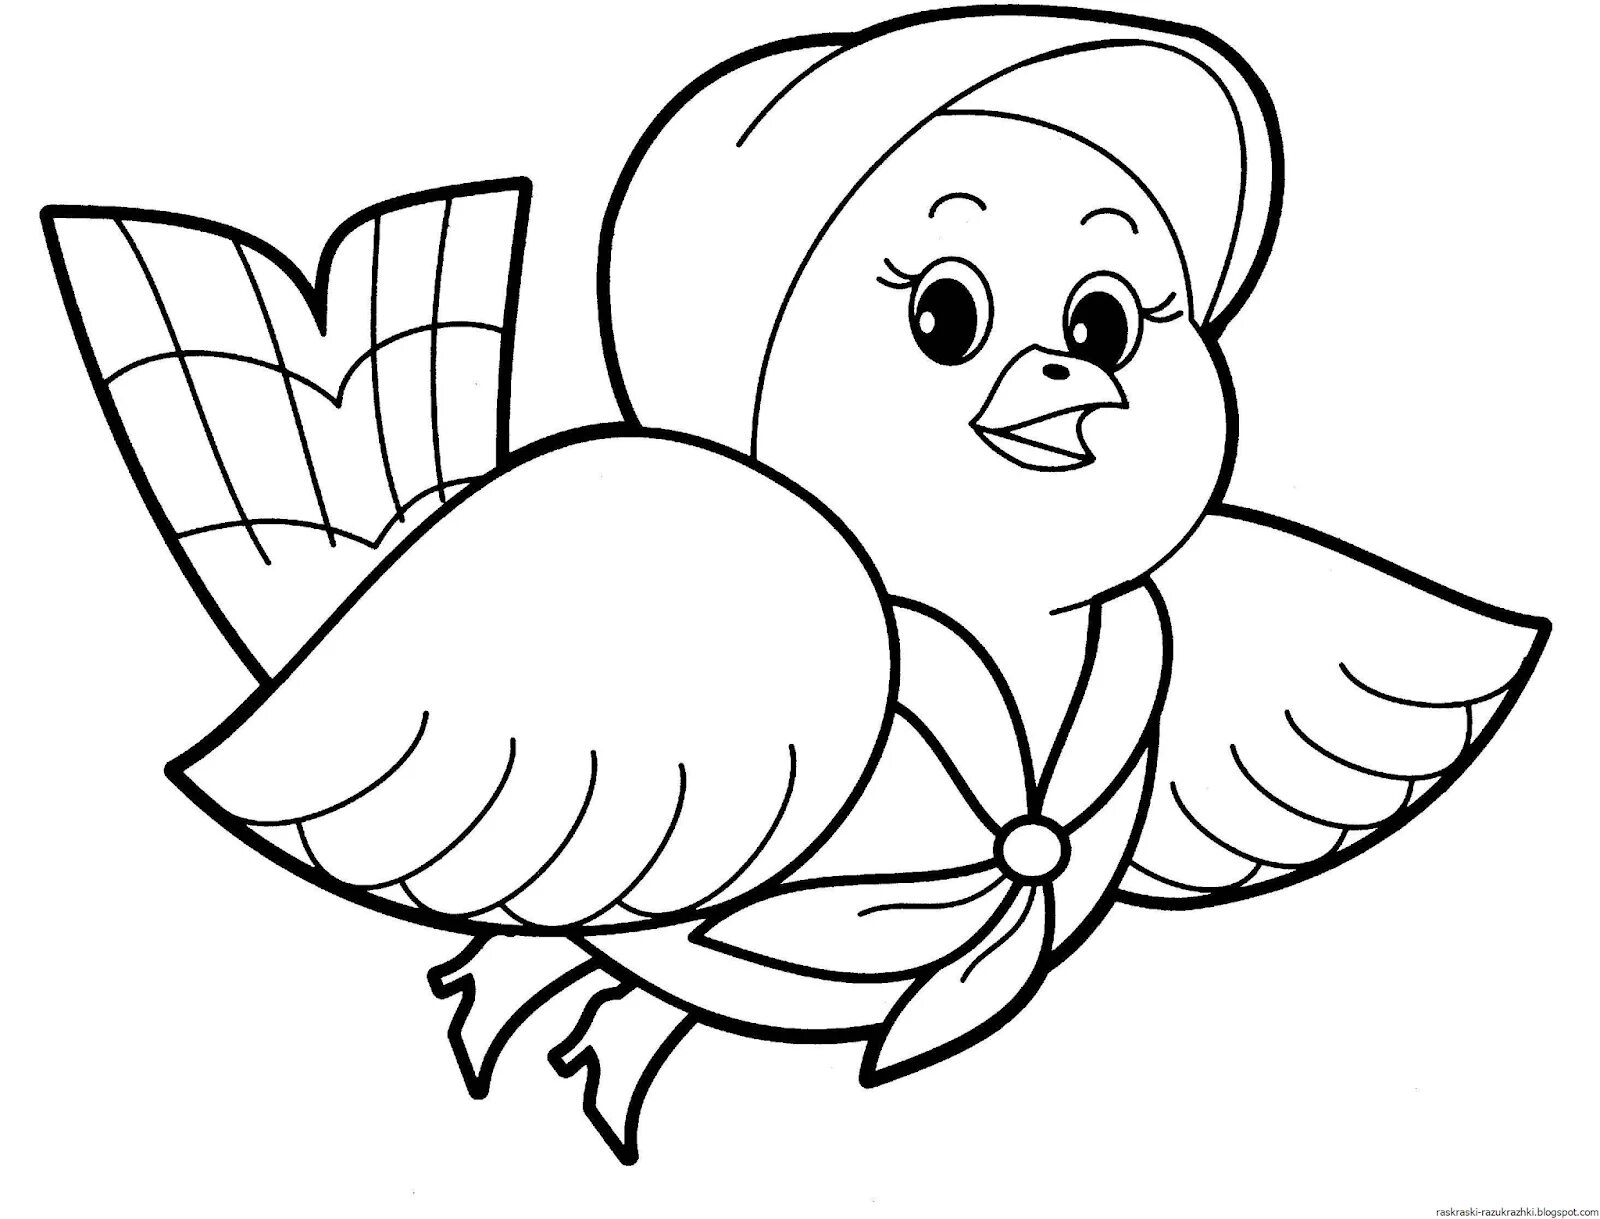 Fantastic bird coloring page for kids